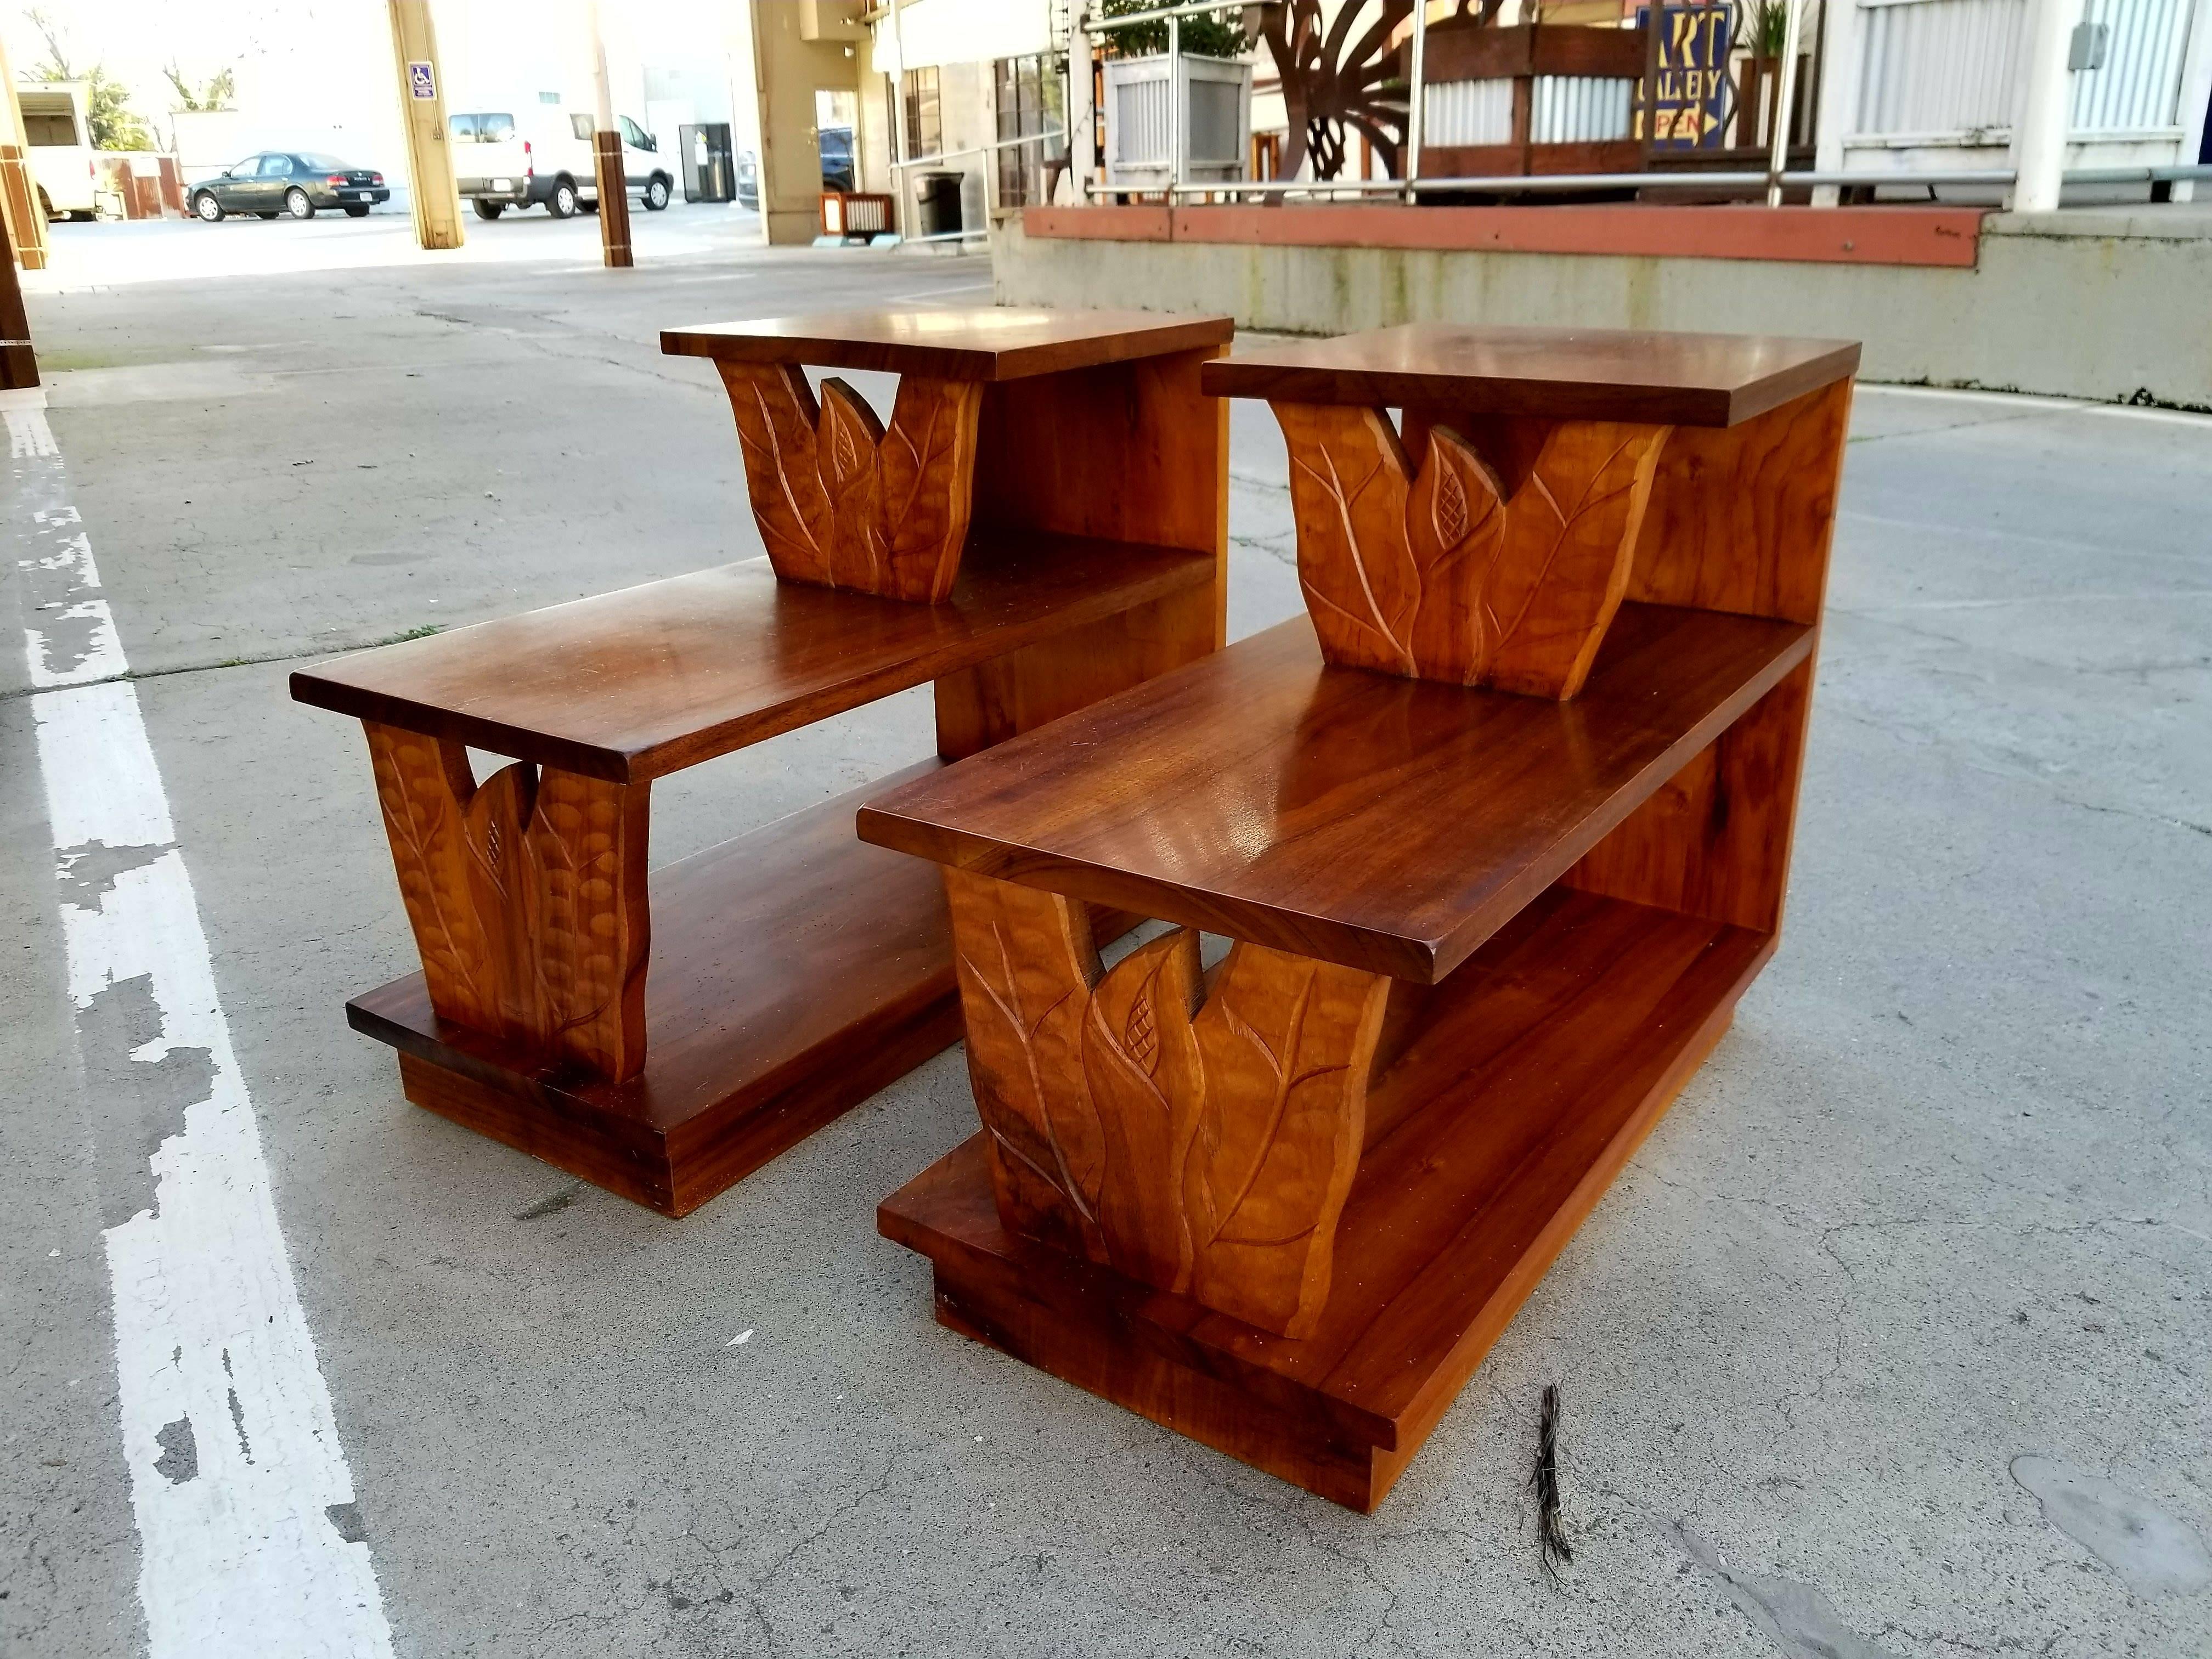 Exceptional and rare pair of Hawaiian Koa step-end tables from the 1960s. Made of solid Koa and curly koa. Warm glow to original finish. Carved leaf and anthurium floral detail. Beautiful figured wood grain. Classic Hawaiiana.